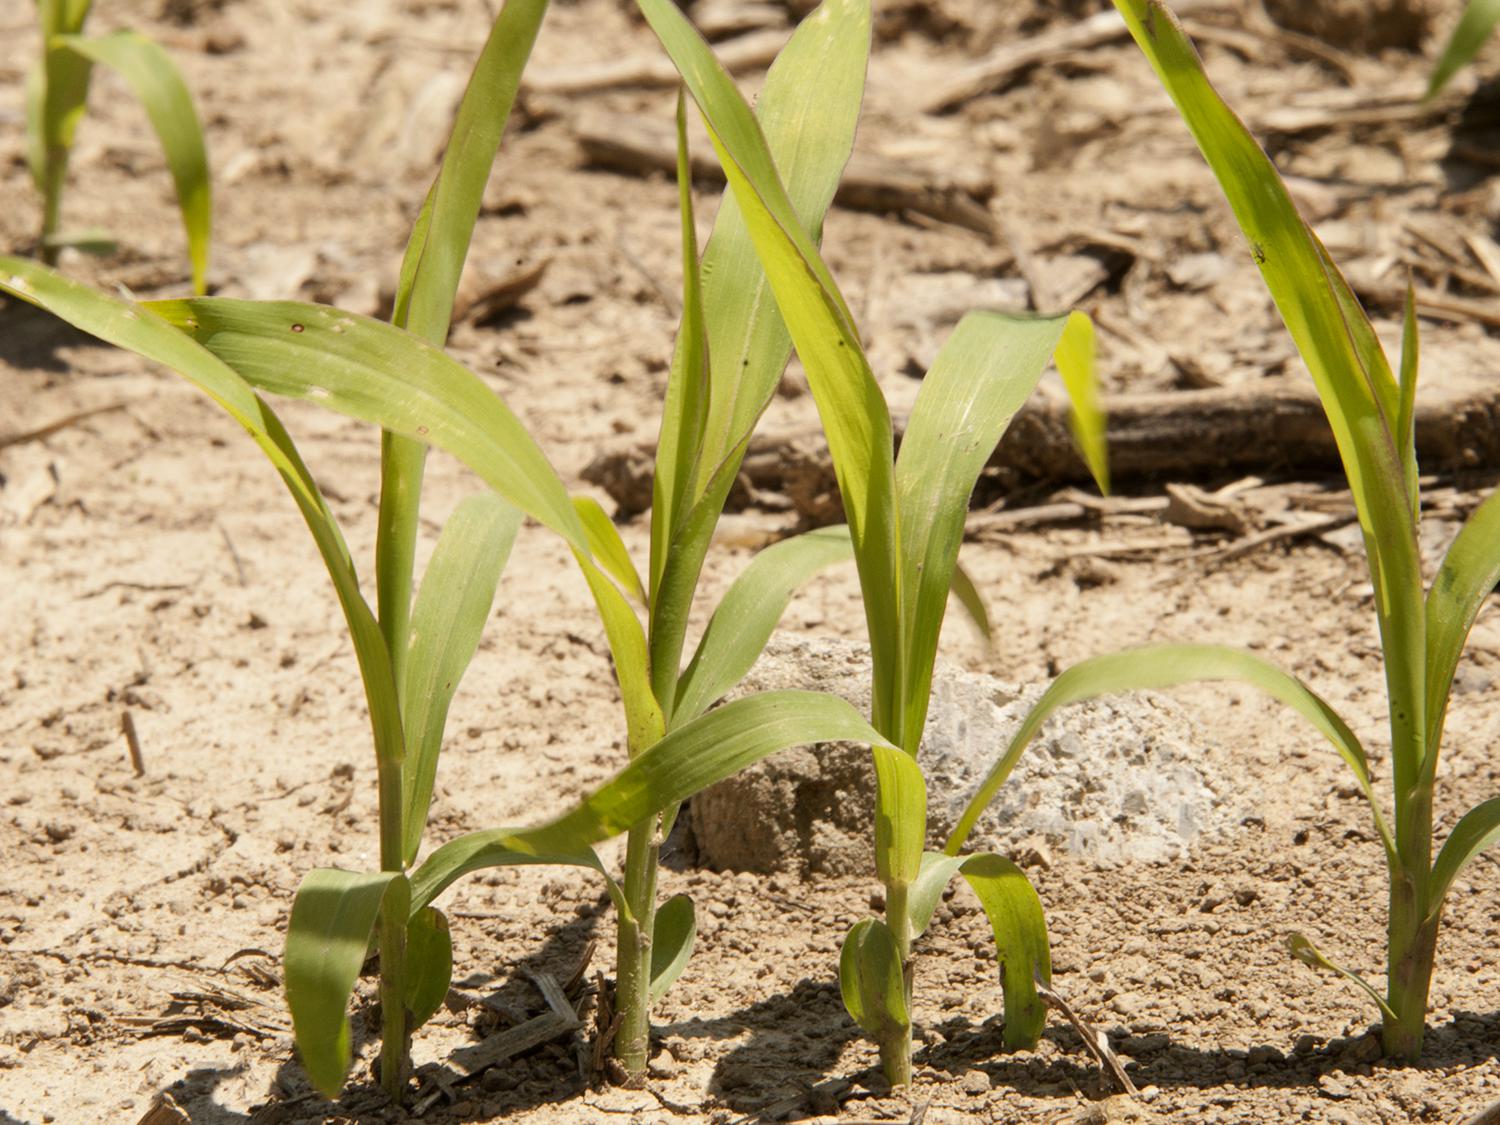 Despite insect challenges last year, grain sorghum acreage in Mississippi is expected to hold steady. This young sorghum was photographed in the Mississippi Delta April 30, 2015. (Photo by MSU Ag Communications/Kat Lawrence)